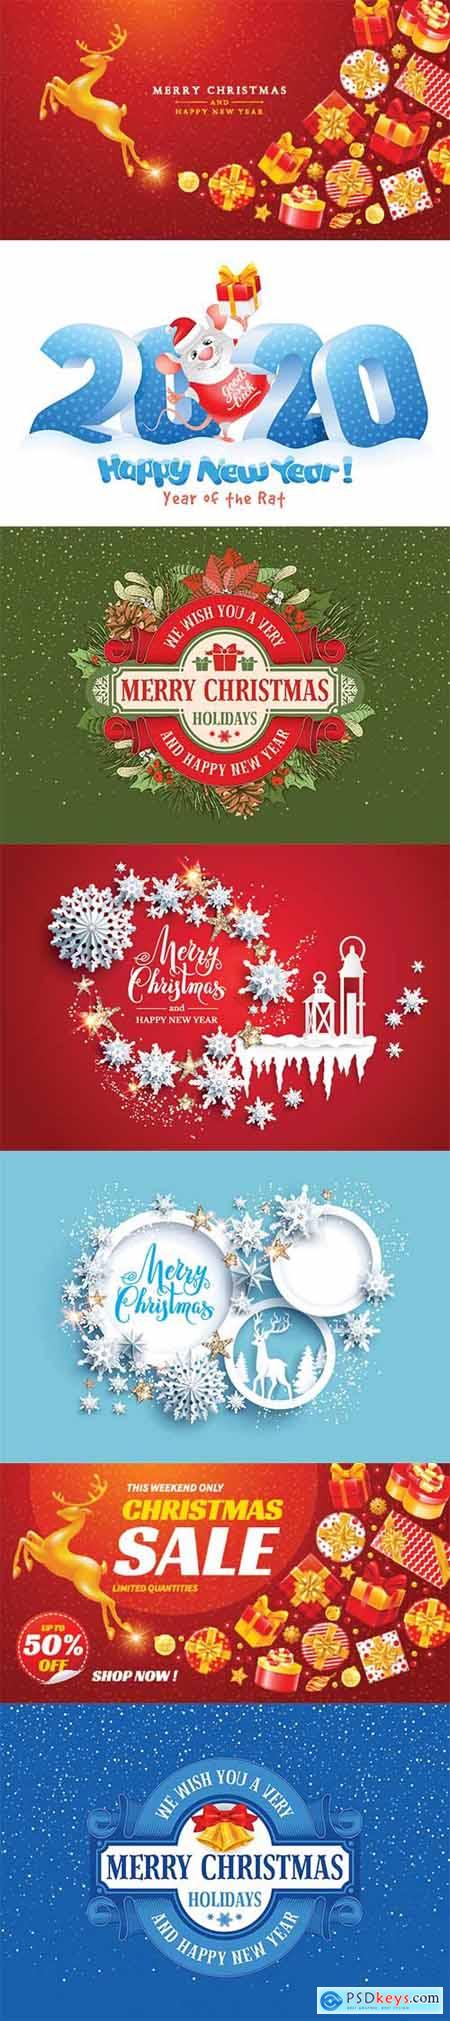 2020 Happy New Year and Christmas vector illustration